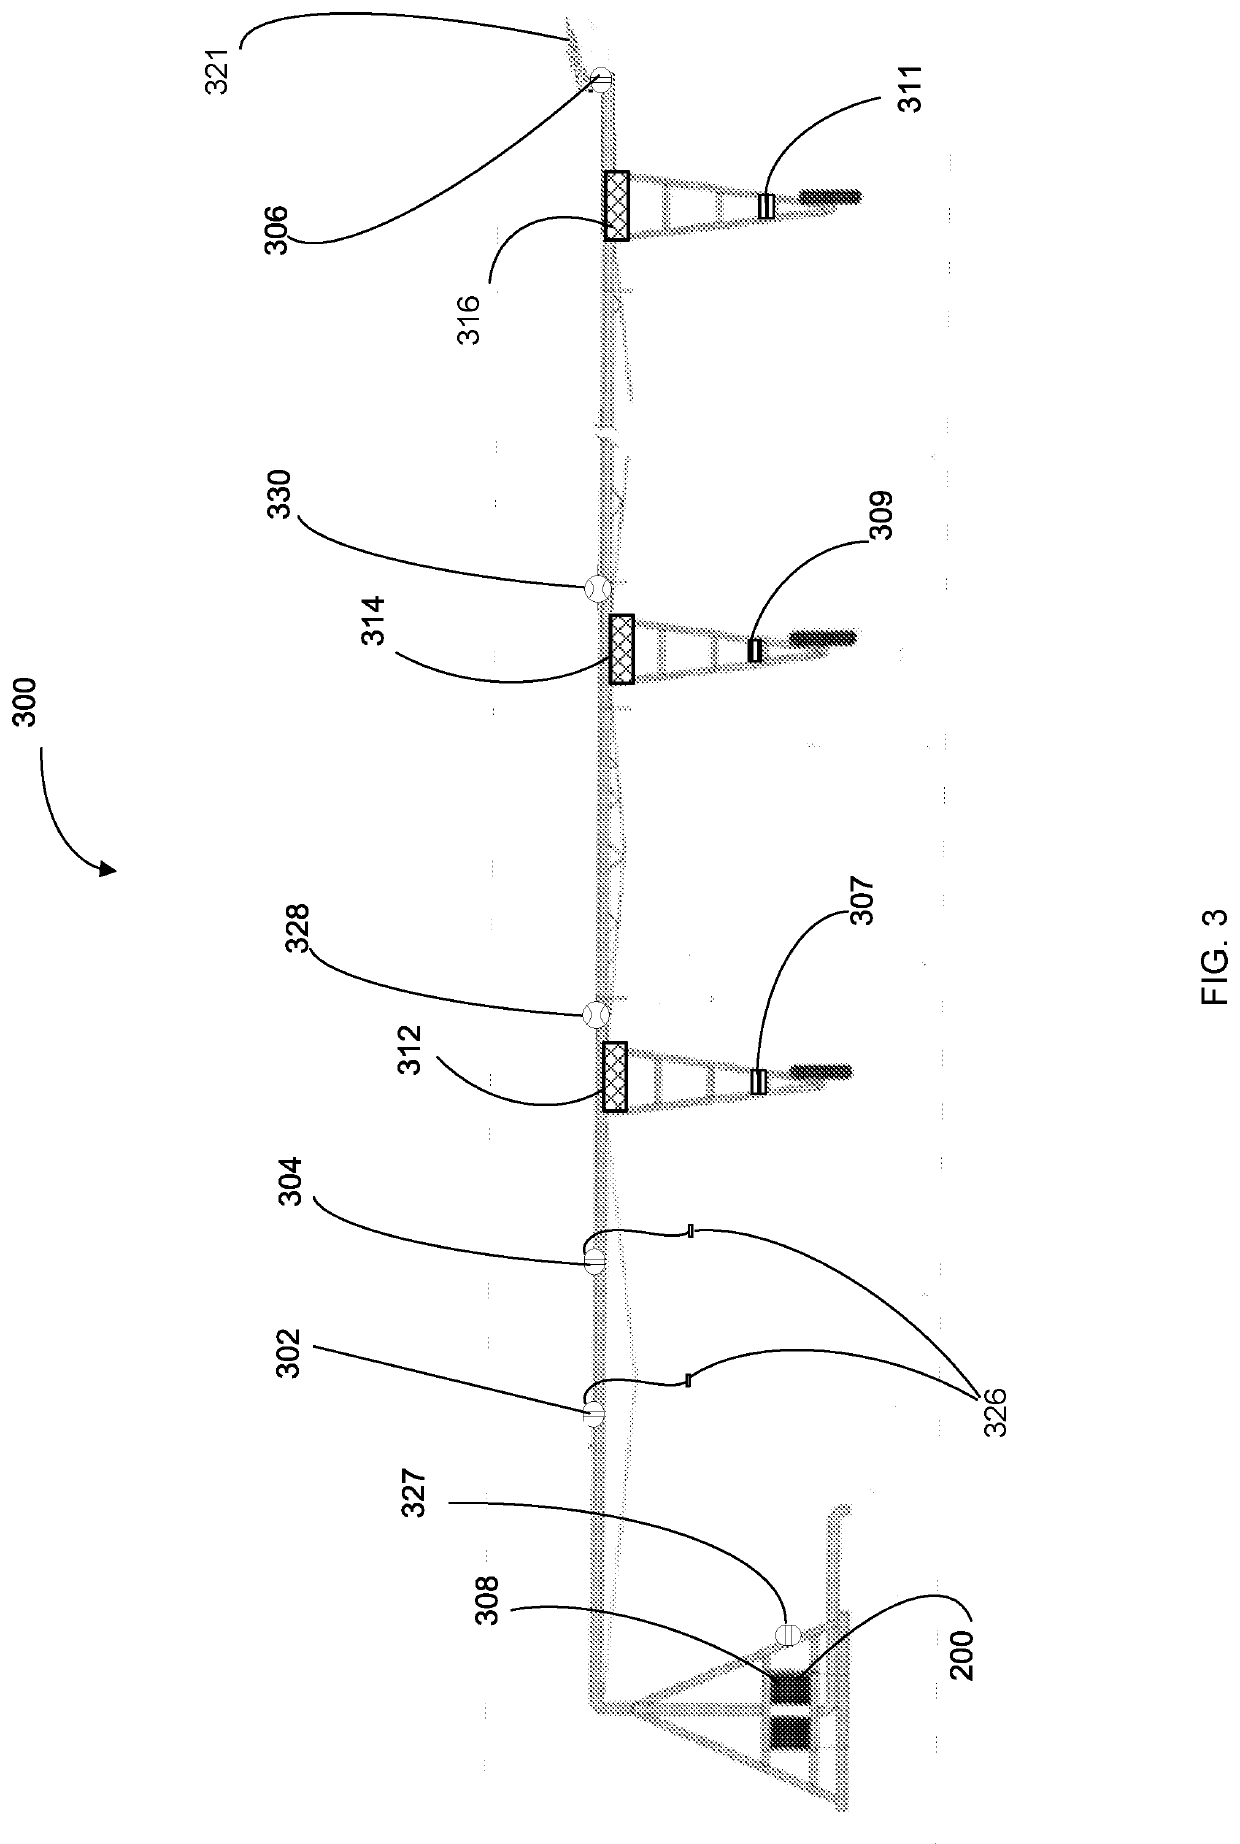 System and method for the integrated use of predictive and machine learning analytics for a center pivot irrigation system